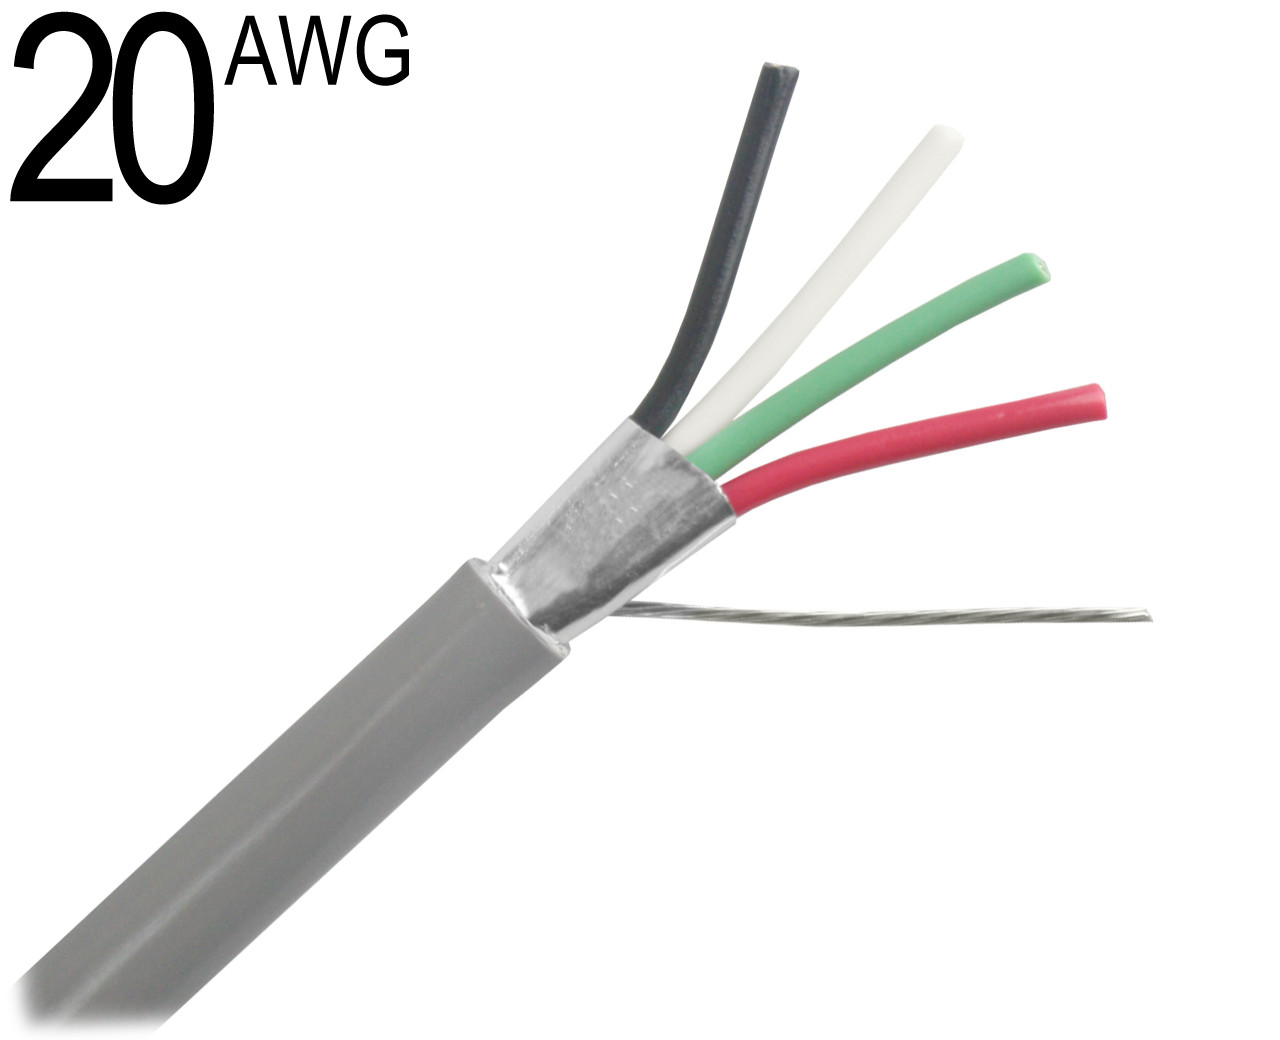 Shielded Multiconductor Cable, 20 AWG